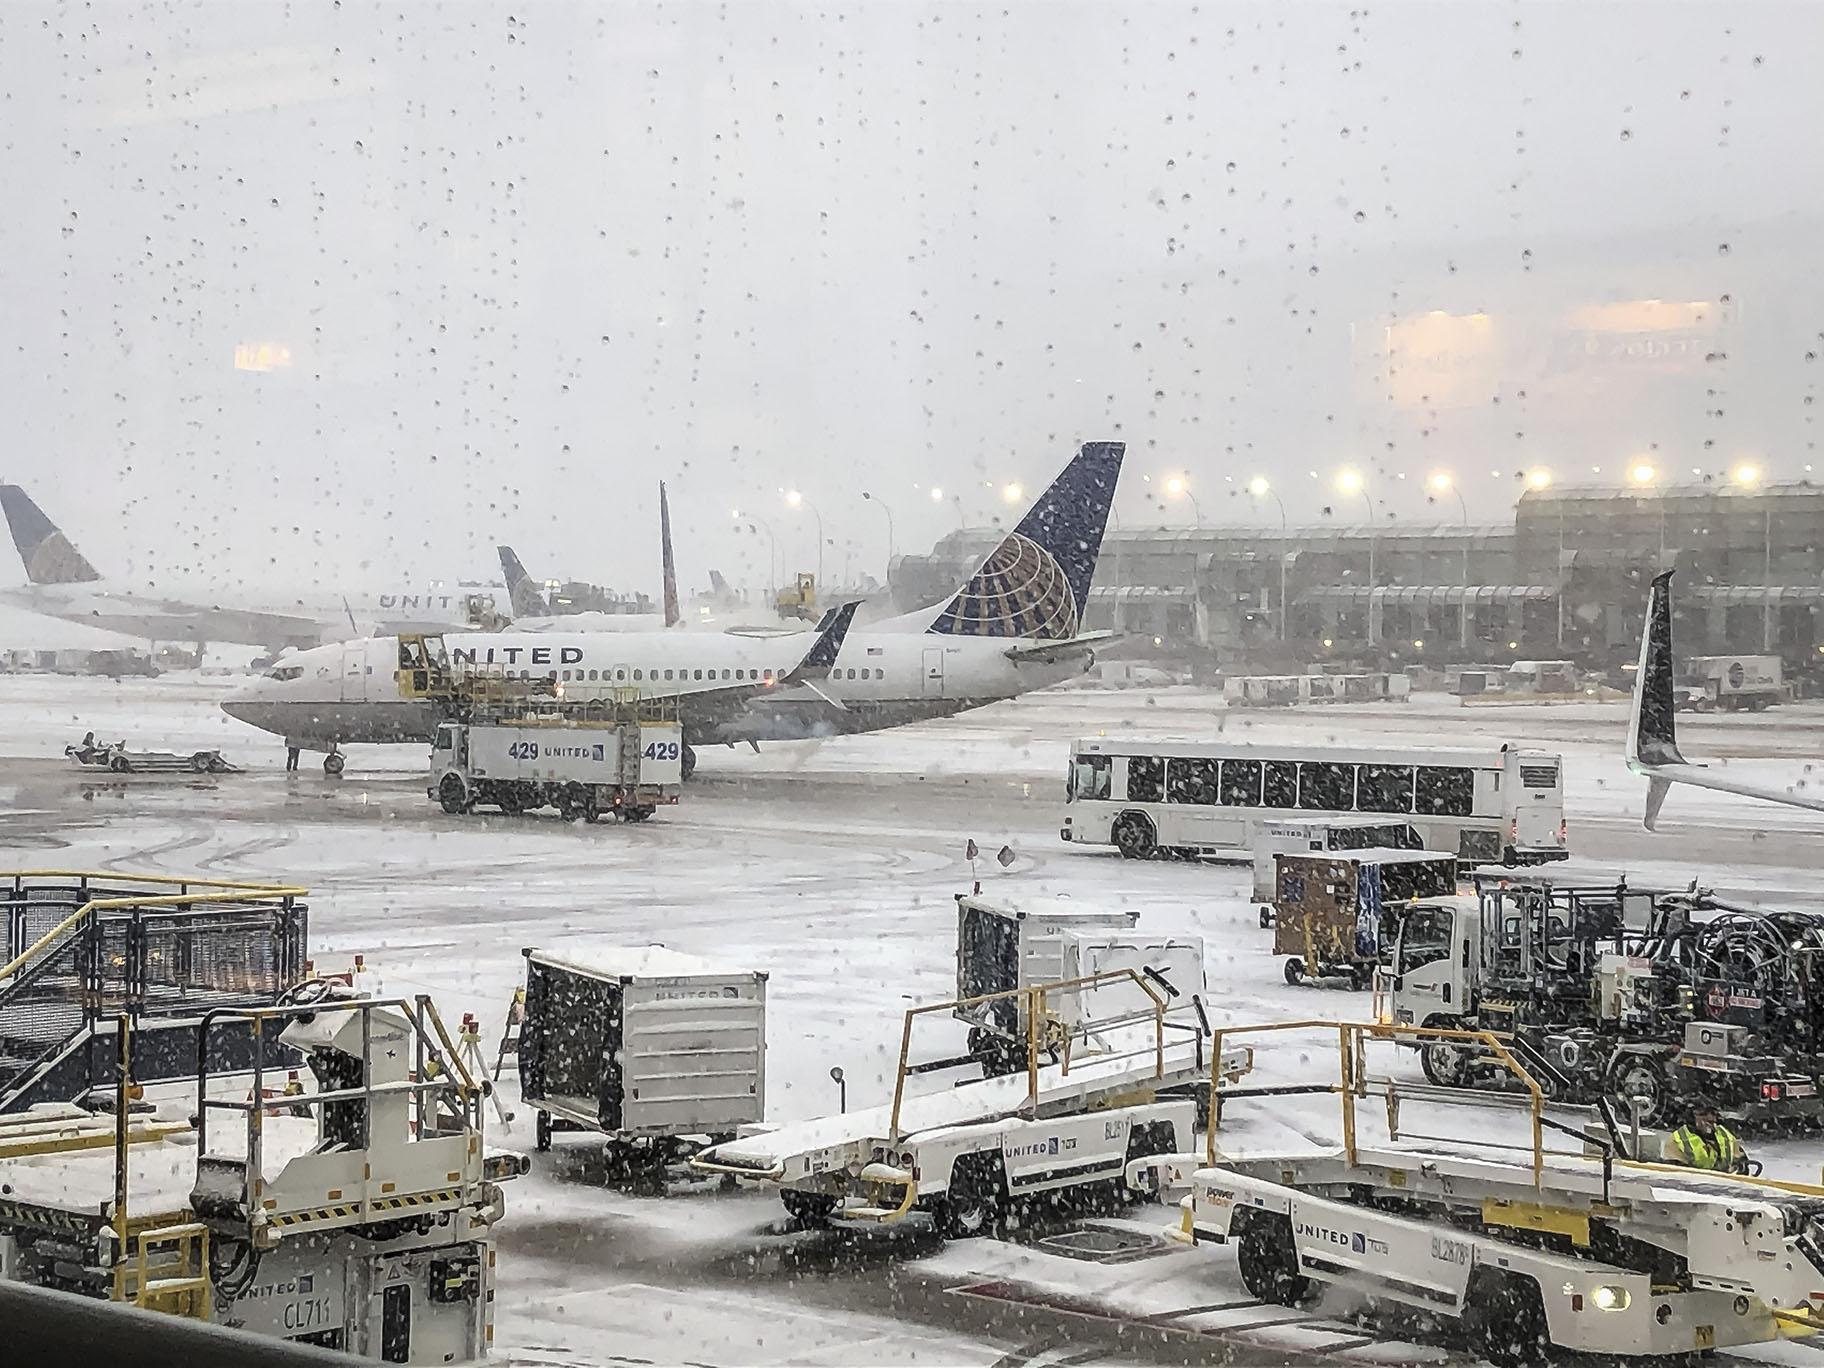 Snow falls on the United Terminal at O’Hare Airport in Chicago on Monday morning, Nov. 11, 2019. (Daryl Van Schouwen / Chicago Sun-Times via AP)